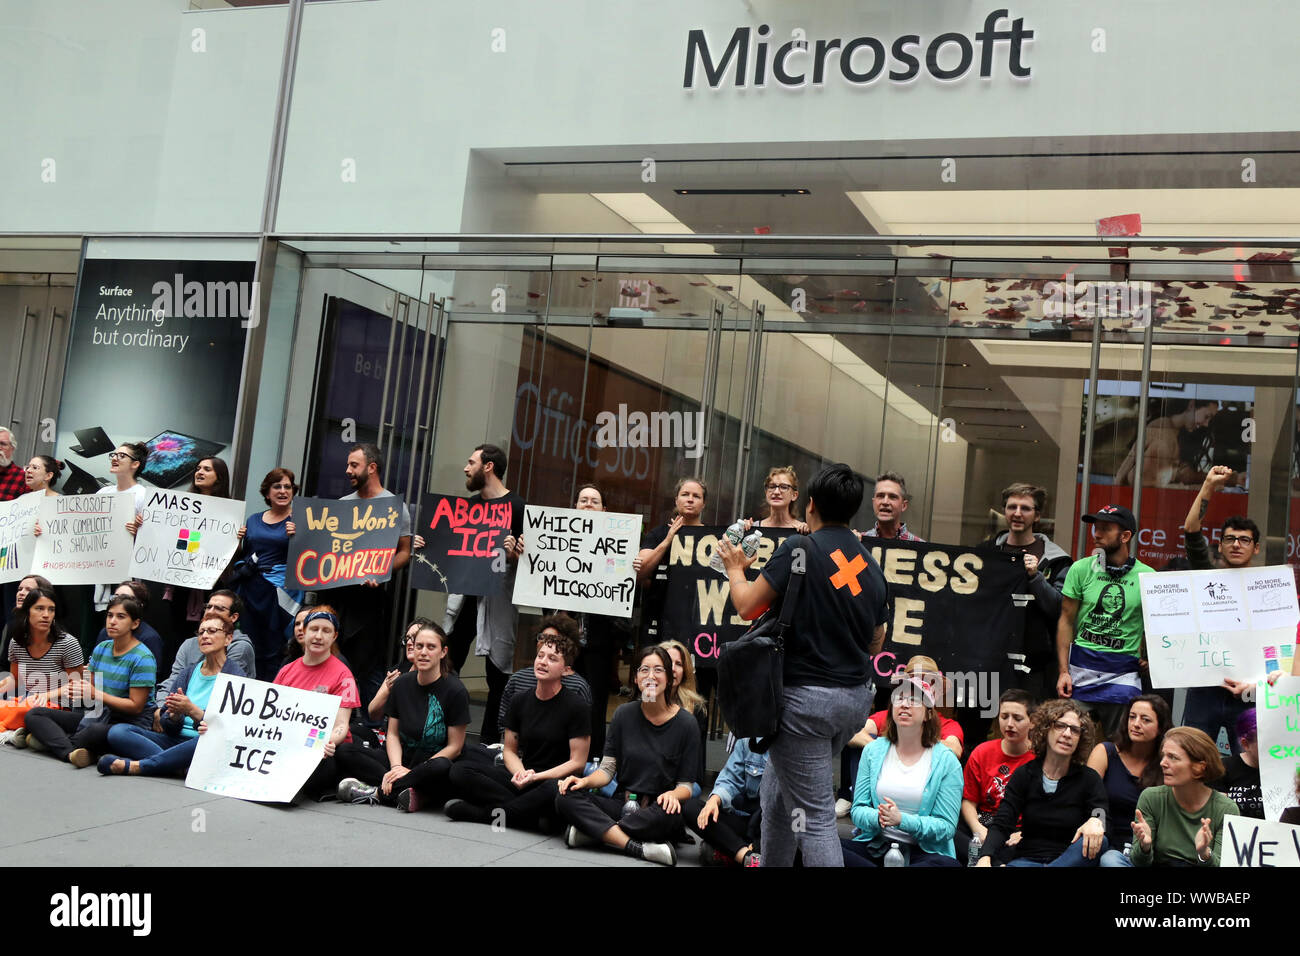 New York, USA. 14th Sep, 2019. Activists protesting the U.S. Immigration and Customs Enforcement (ICE) policies and family separation practices, rallied on the steps of the NYC Public Library on 14 September, 2019 and then marched to technology giant Microsoft's Fifth Avenue retail store, where they joined other protesters who had already blockaded the entrance and some, occupied the interior of the store. Credit: G. Ronald Lopez/ZUMA Wire/Alamy Live News Stock Photo